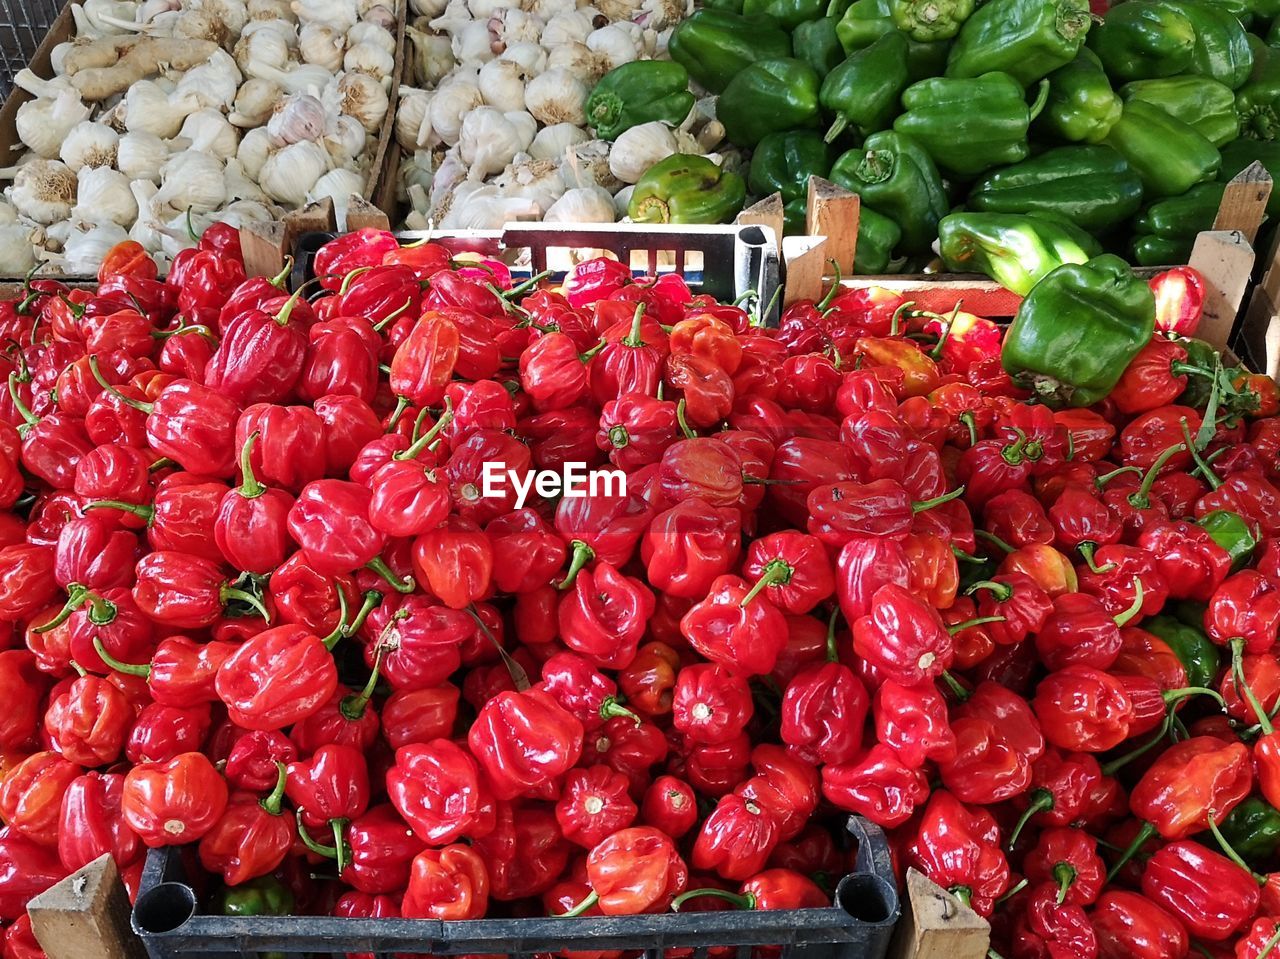 RED CHILI PEPPERS FOR SALE IN MARKET STALL